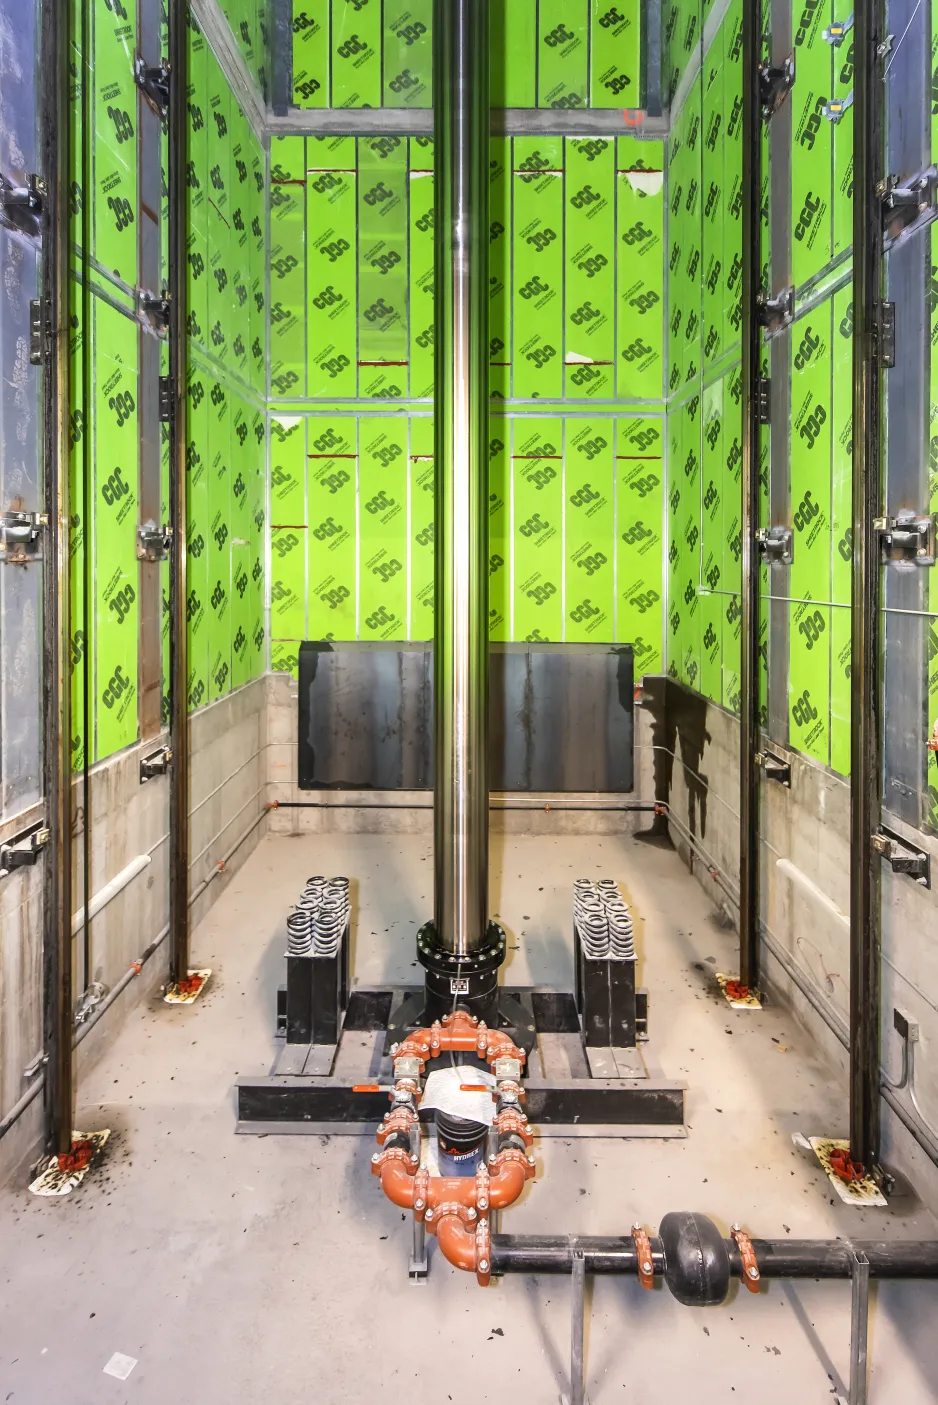 An inside view of the elevator shaft, which is a rectangular enclosure with bright green walls and a massive, steel column in the middle.